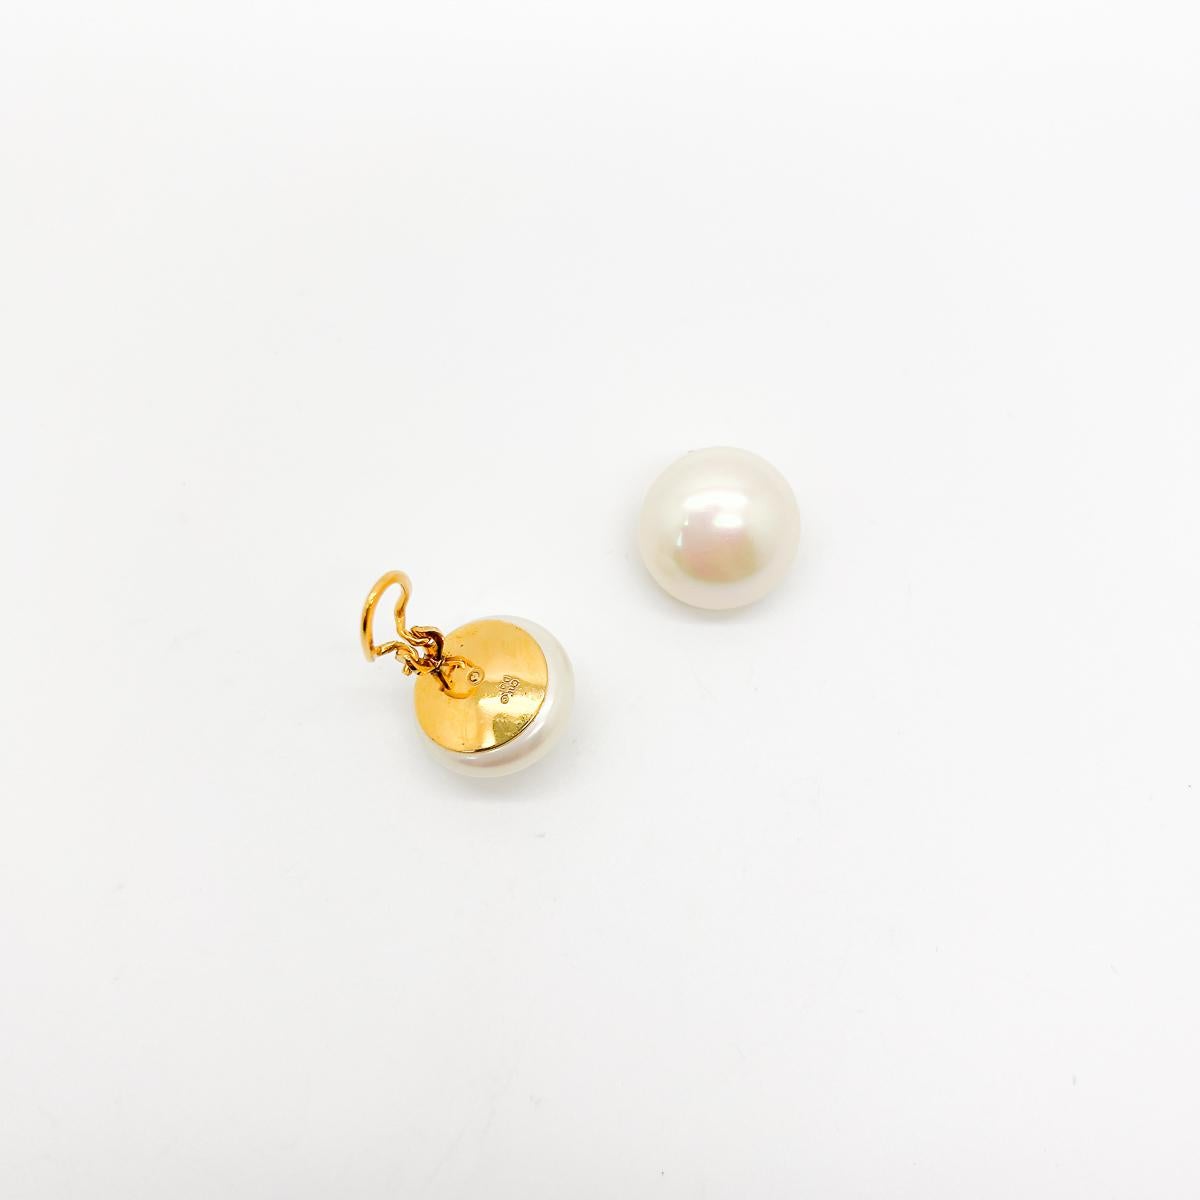 A pair of Vintage Dior Pearl Stud Earrings. The epitome of chic style.
With archive pieces from her own Dior collection displayed in London's highly acclaimed Dior Designer of Dreams Exhibition, Jennifer understands what it’s like to be on the hunt